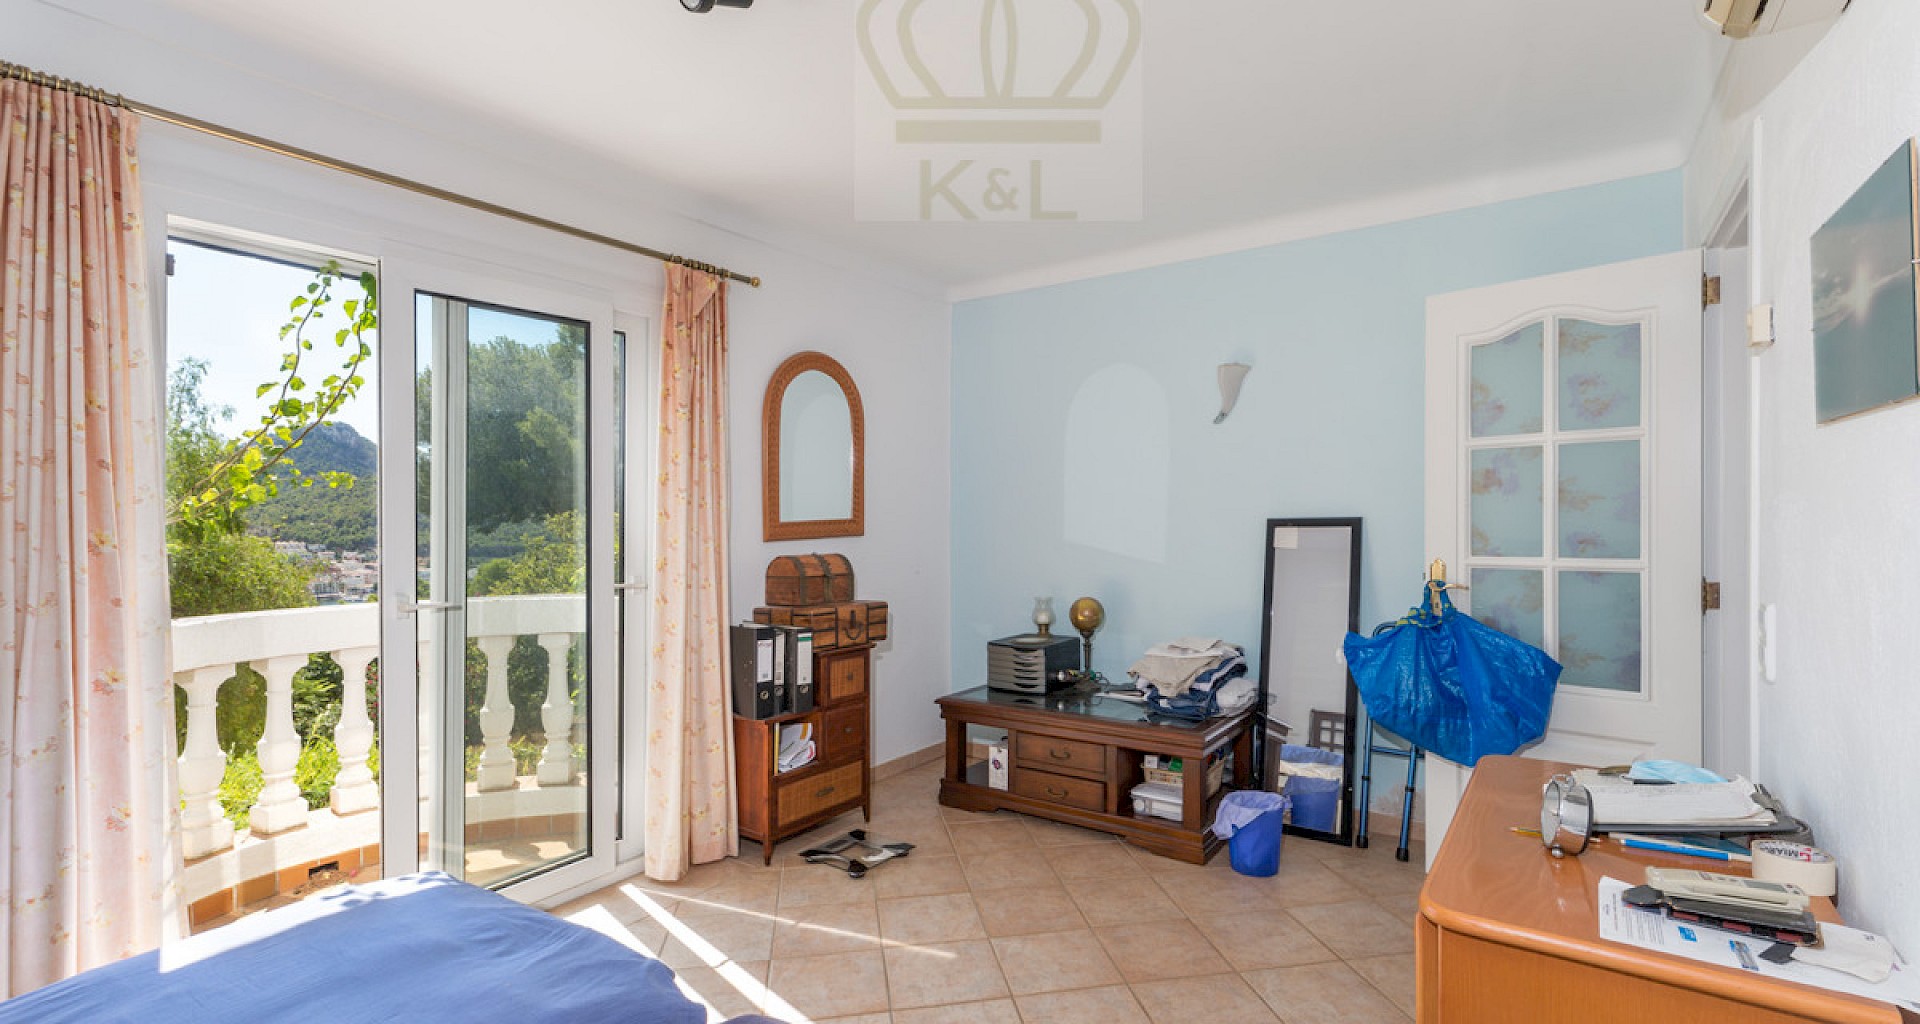 KROHN & LUEDEMANN Mediterranean villa in Port Andratx with lots of charm and potential 3) Bedroom - guest house ground floor.jpg